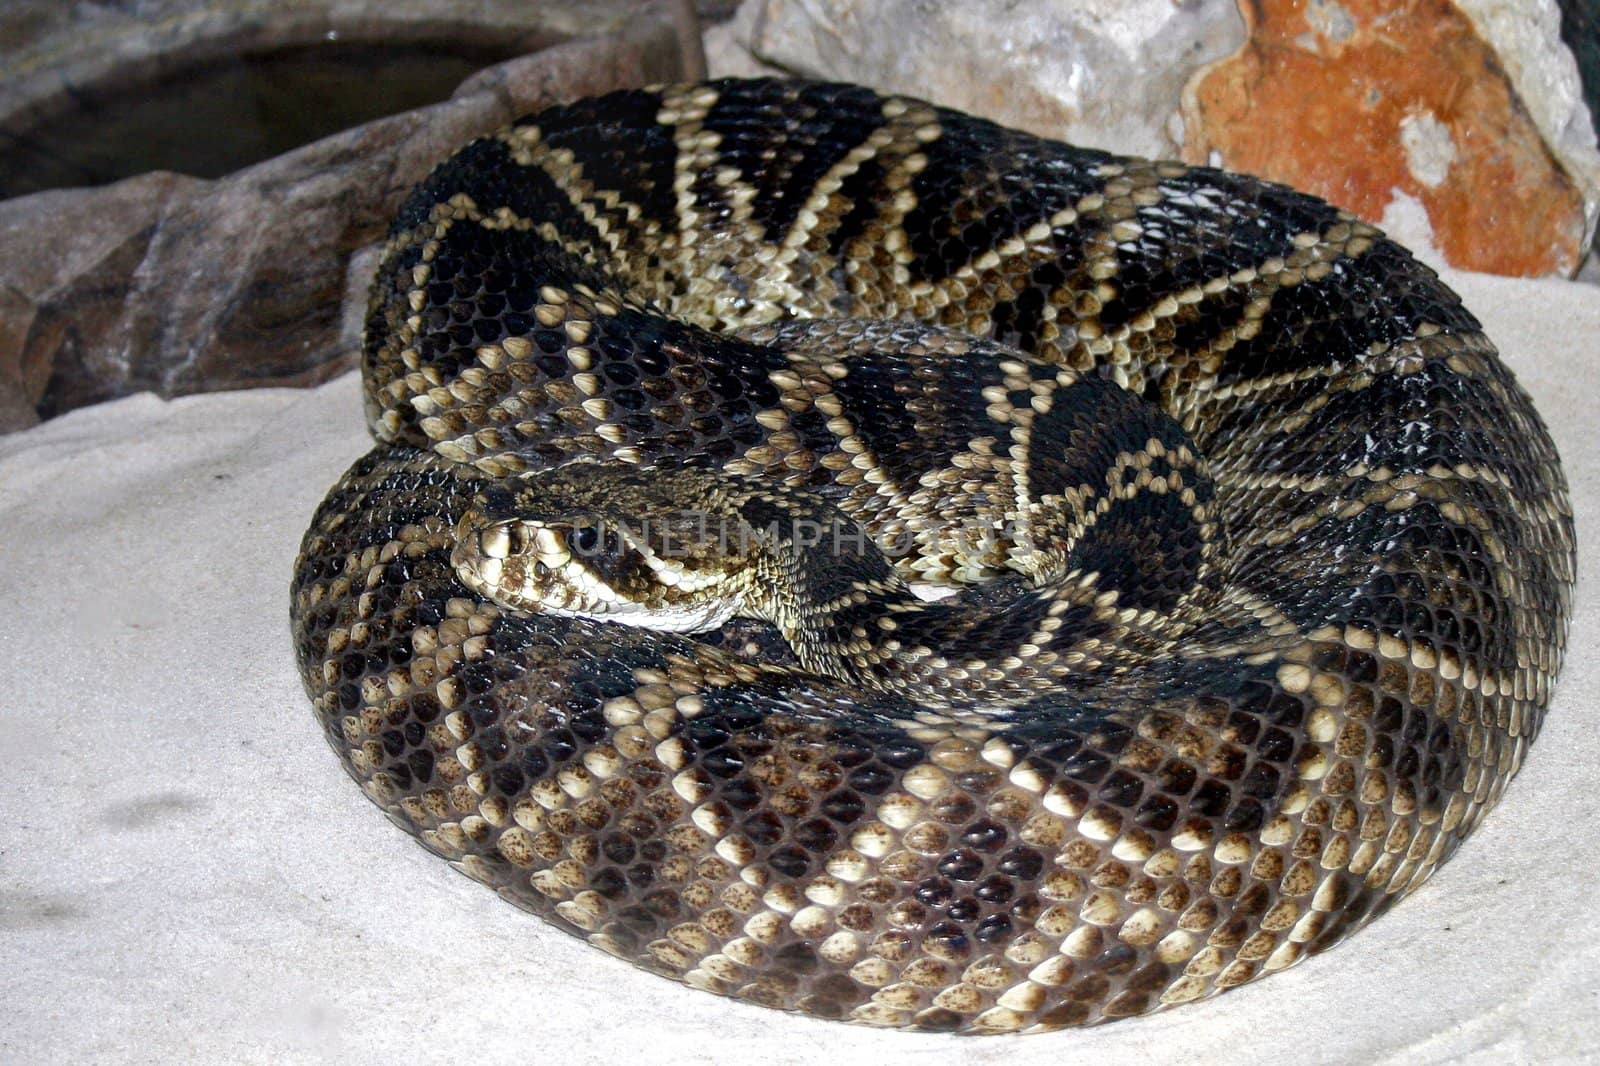 A snake curling up in its exhibit, looking out.